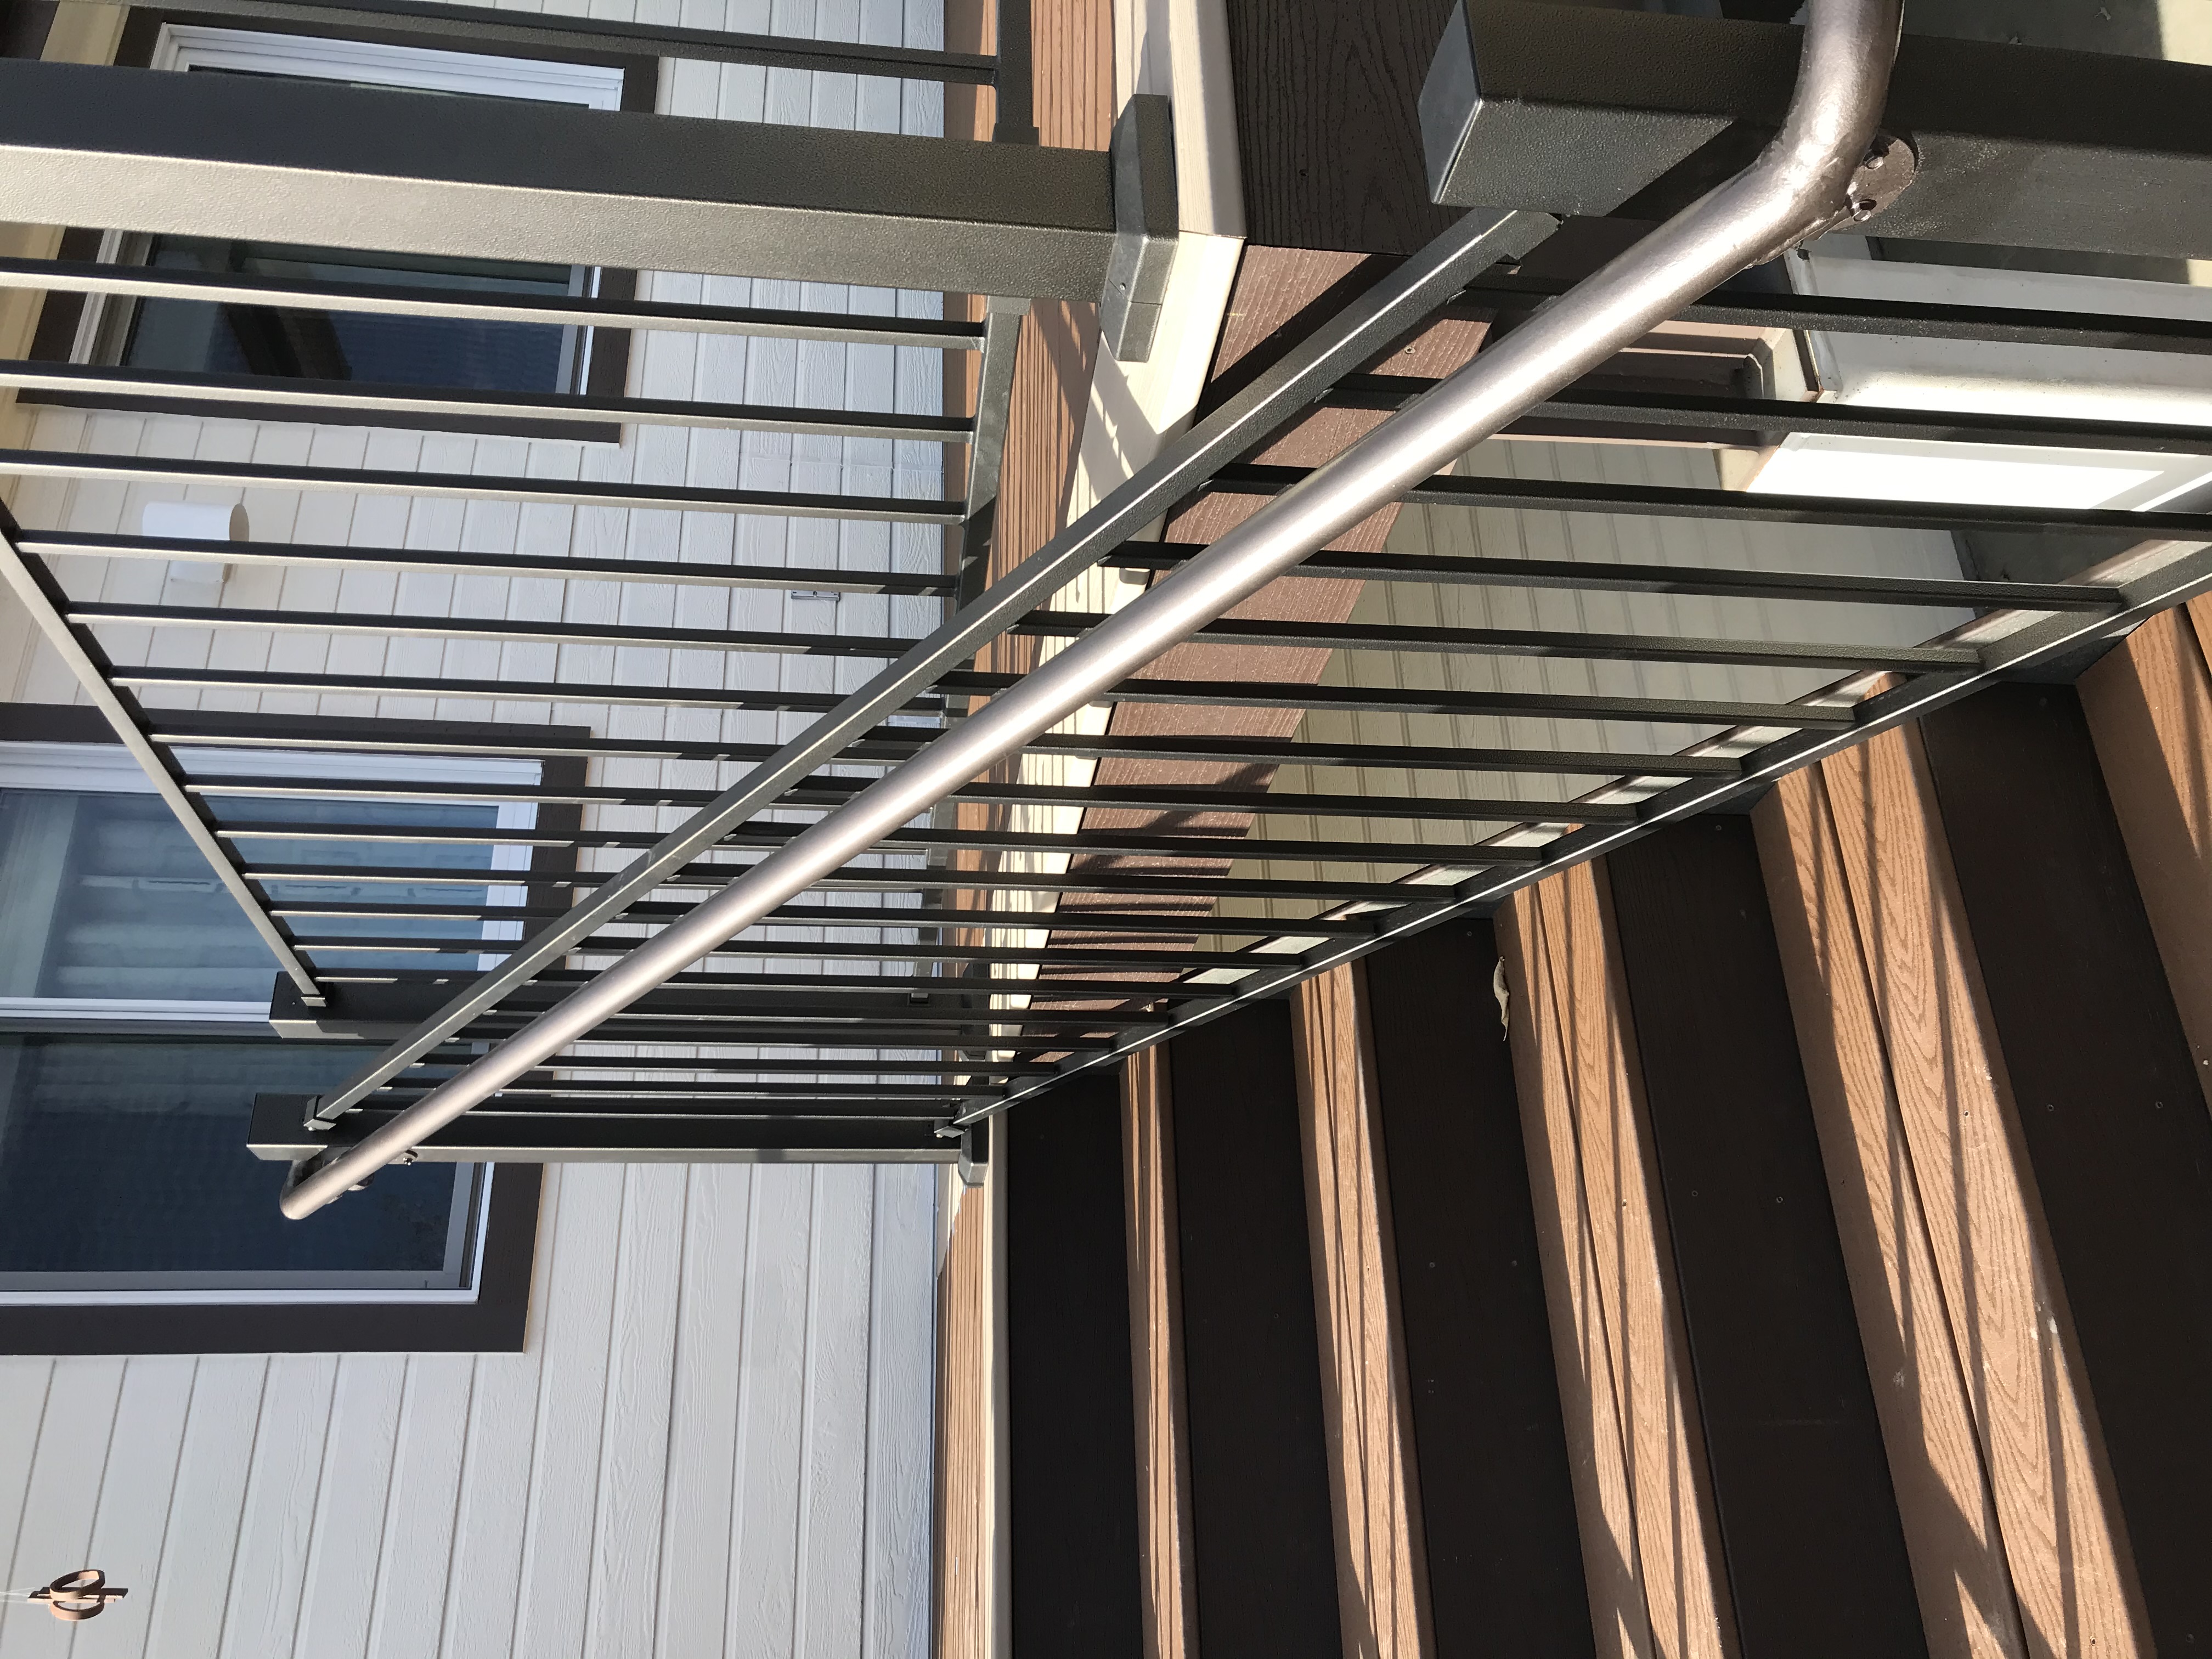 Deck, staircase, handrail, and steel railing